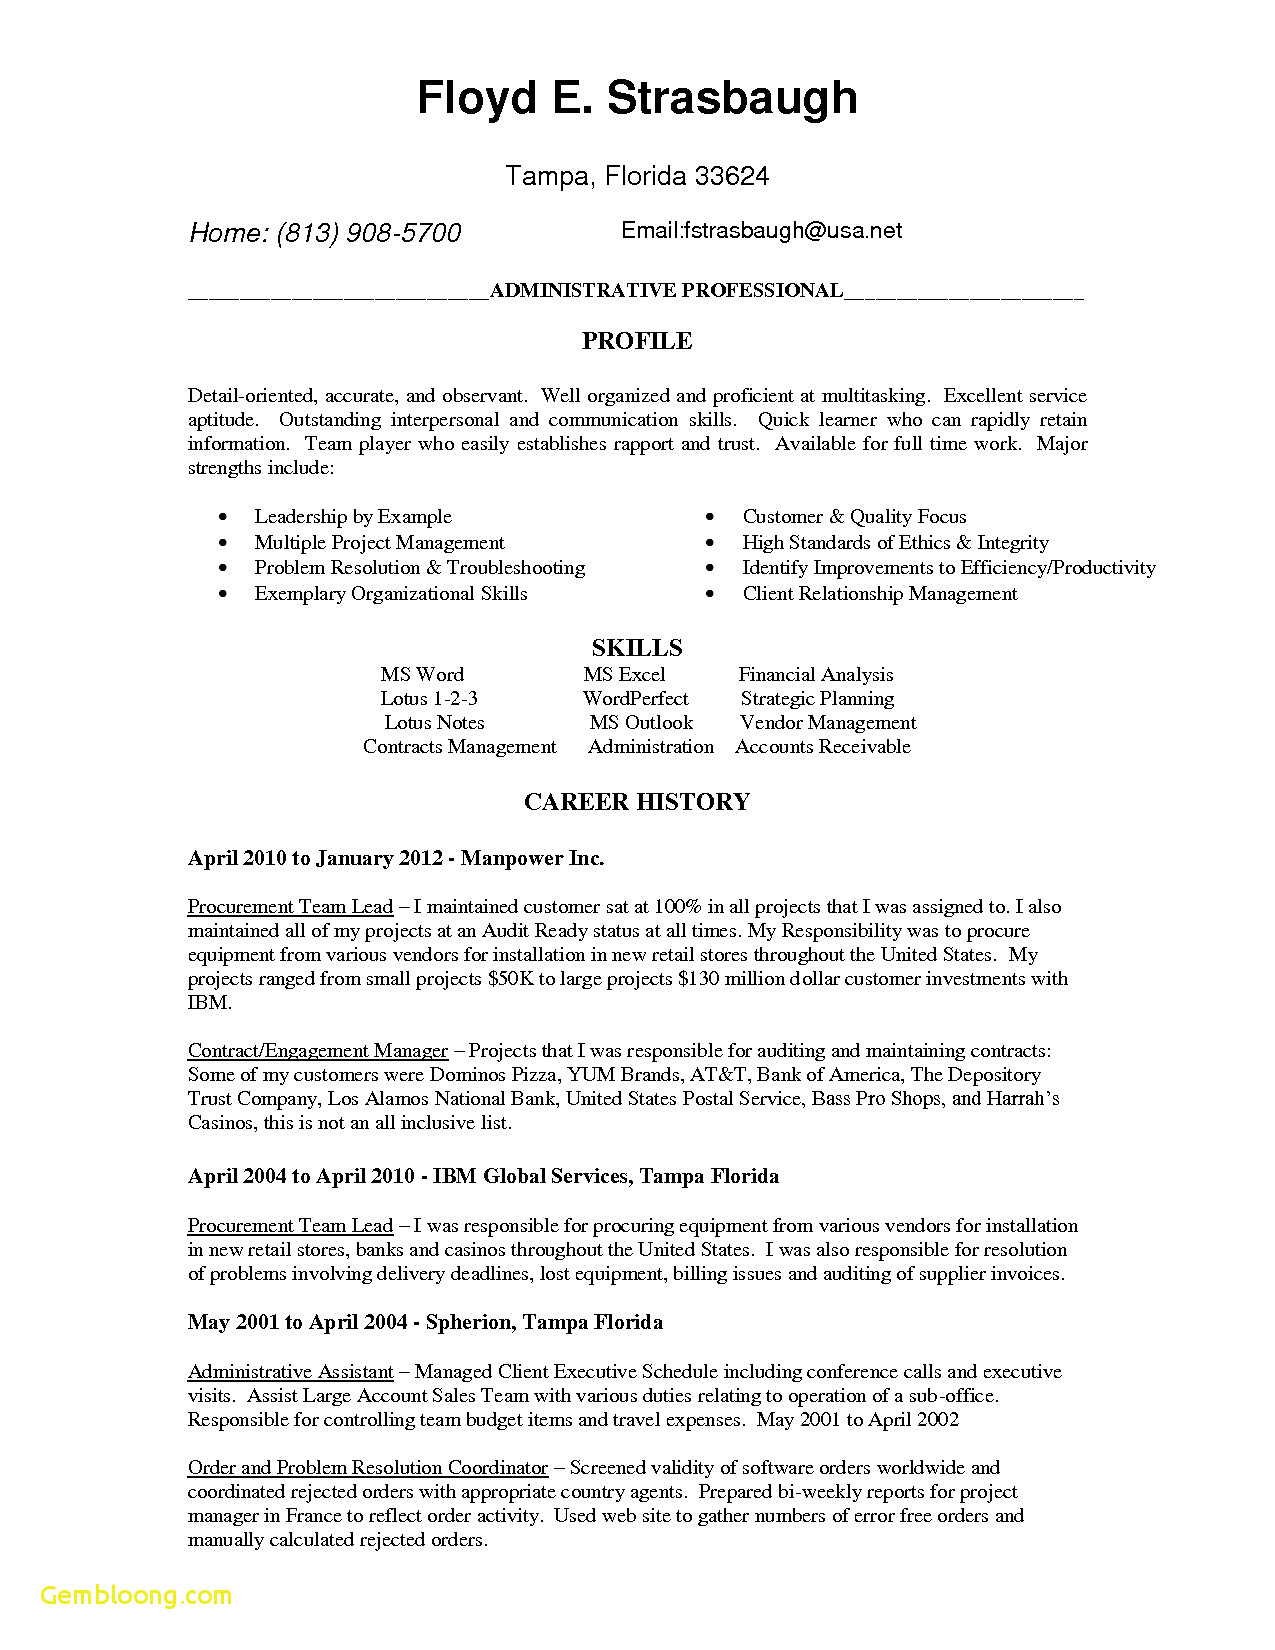 cover letter template word free download Collection-Free Professional Resume Templates Microsoft Word Download English Letter Template Word Copy Od Specialist Cover Letter 4-s